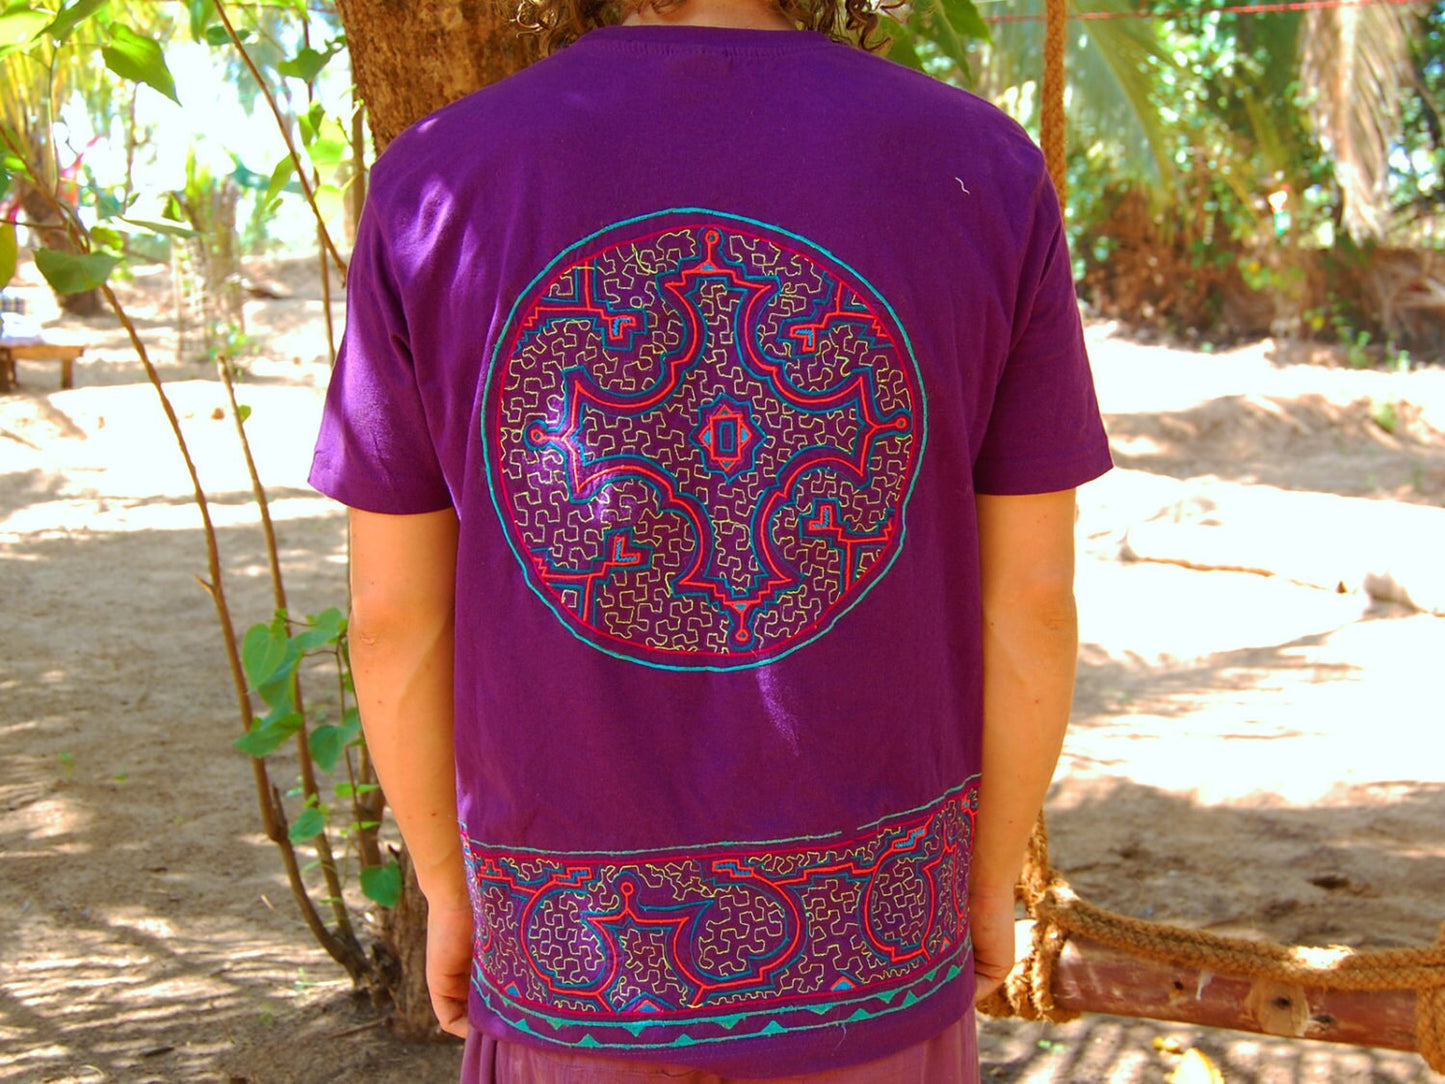 Ayahuasca T-Shirt Shipibo Conibo DMT Psychedelic Artwork Yage embroidery